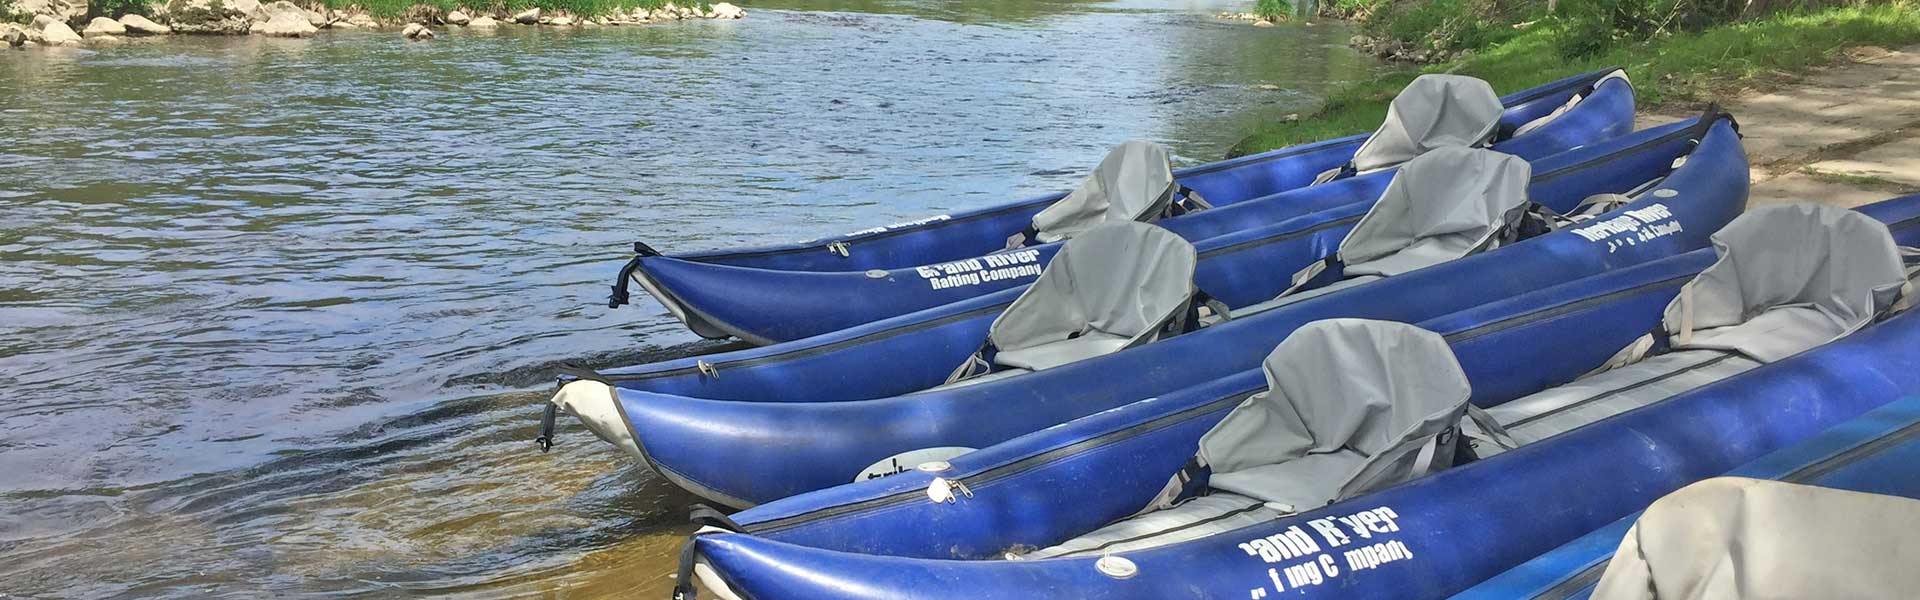 Grand River Rafting Non-tip 2 man yaks ready to be launched on the Grand River